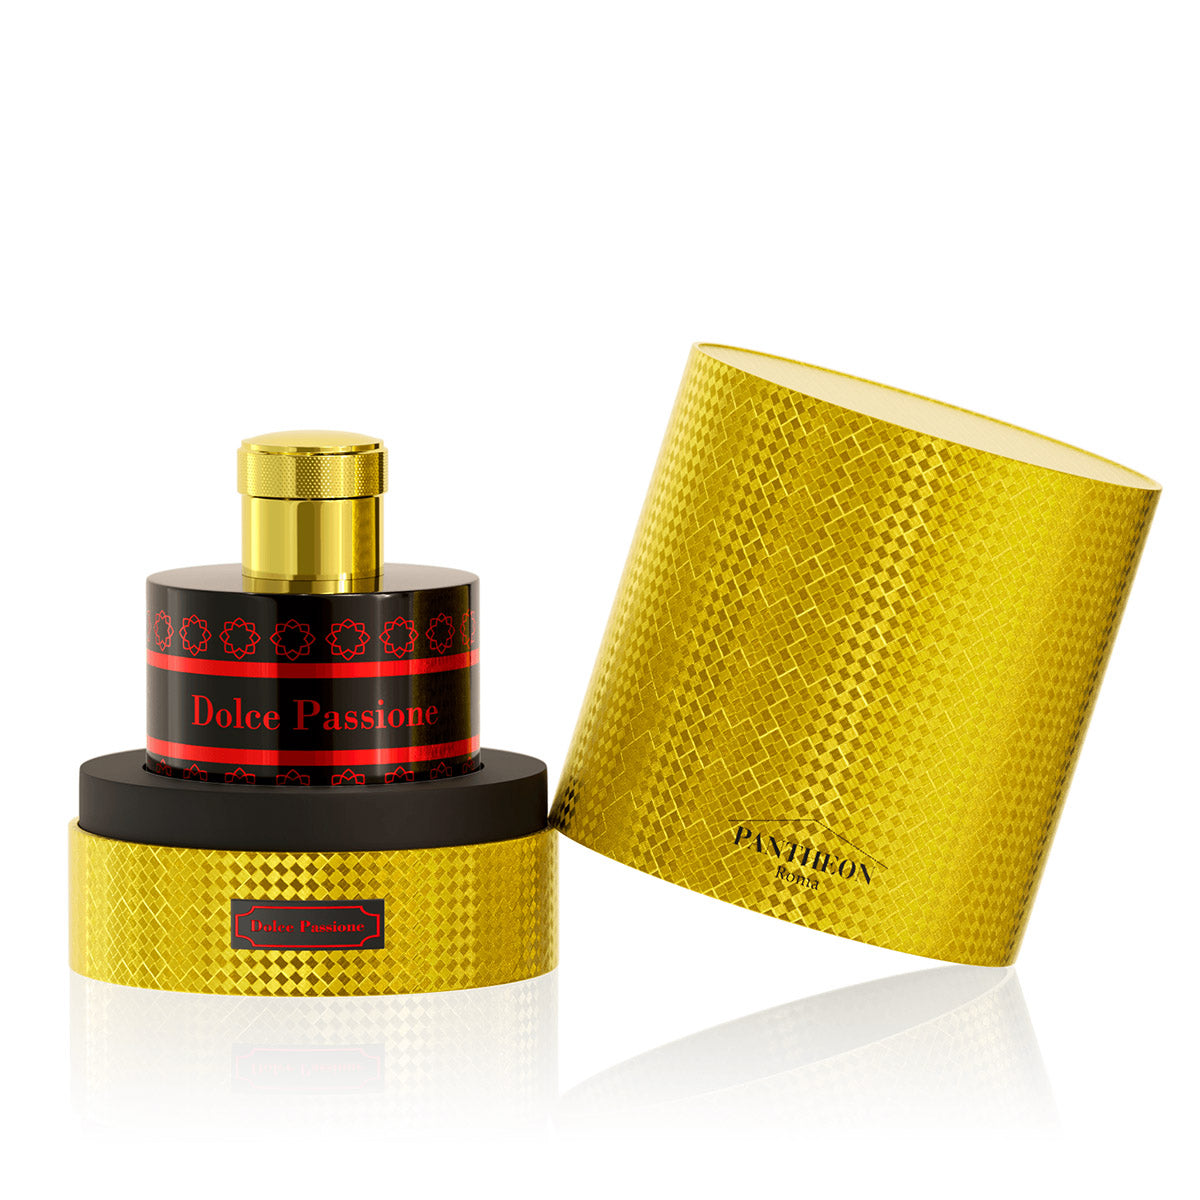 Dolce Passione - Pantheon Roma - EP100ml